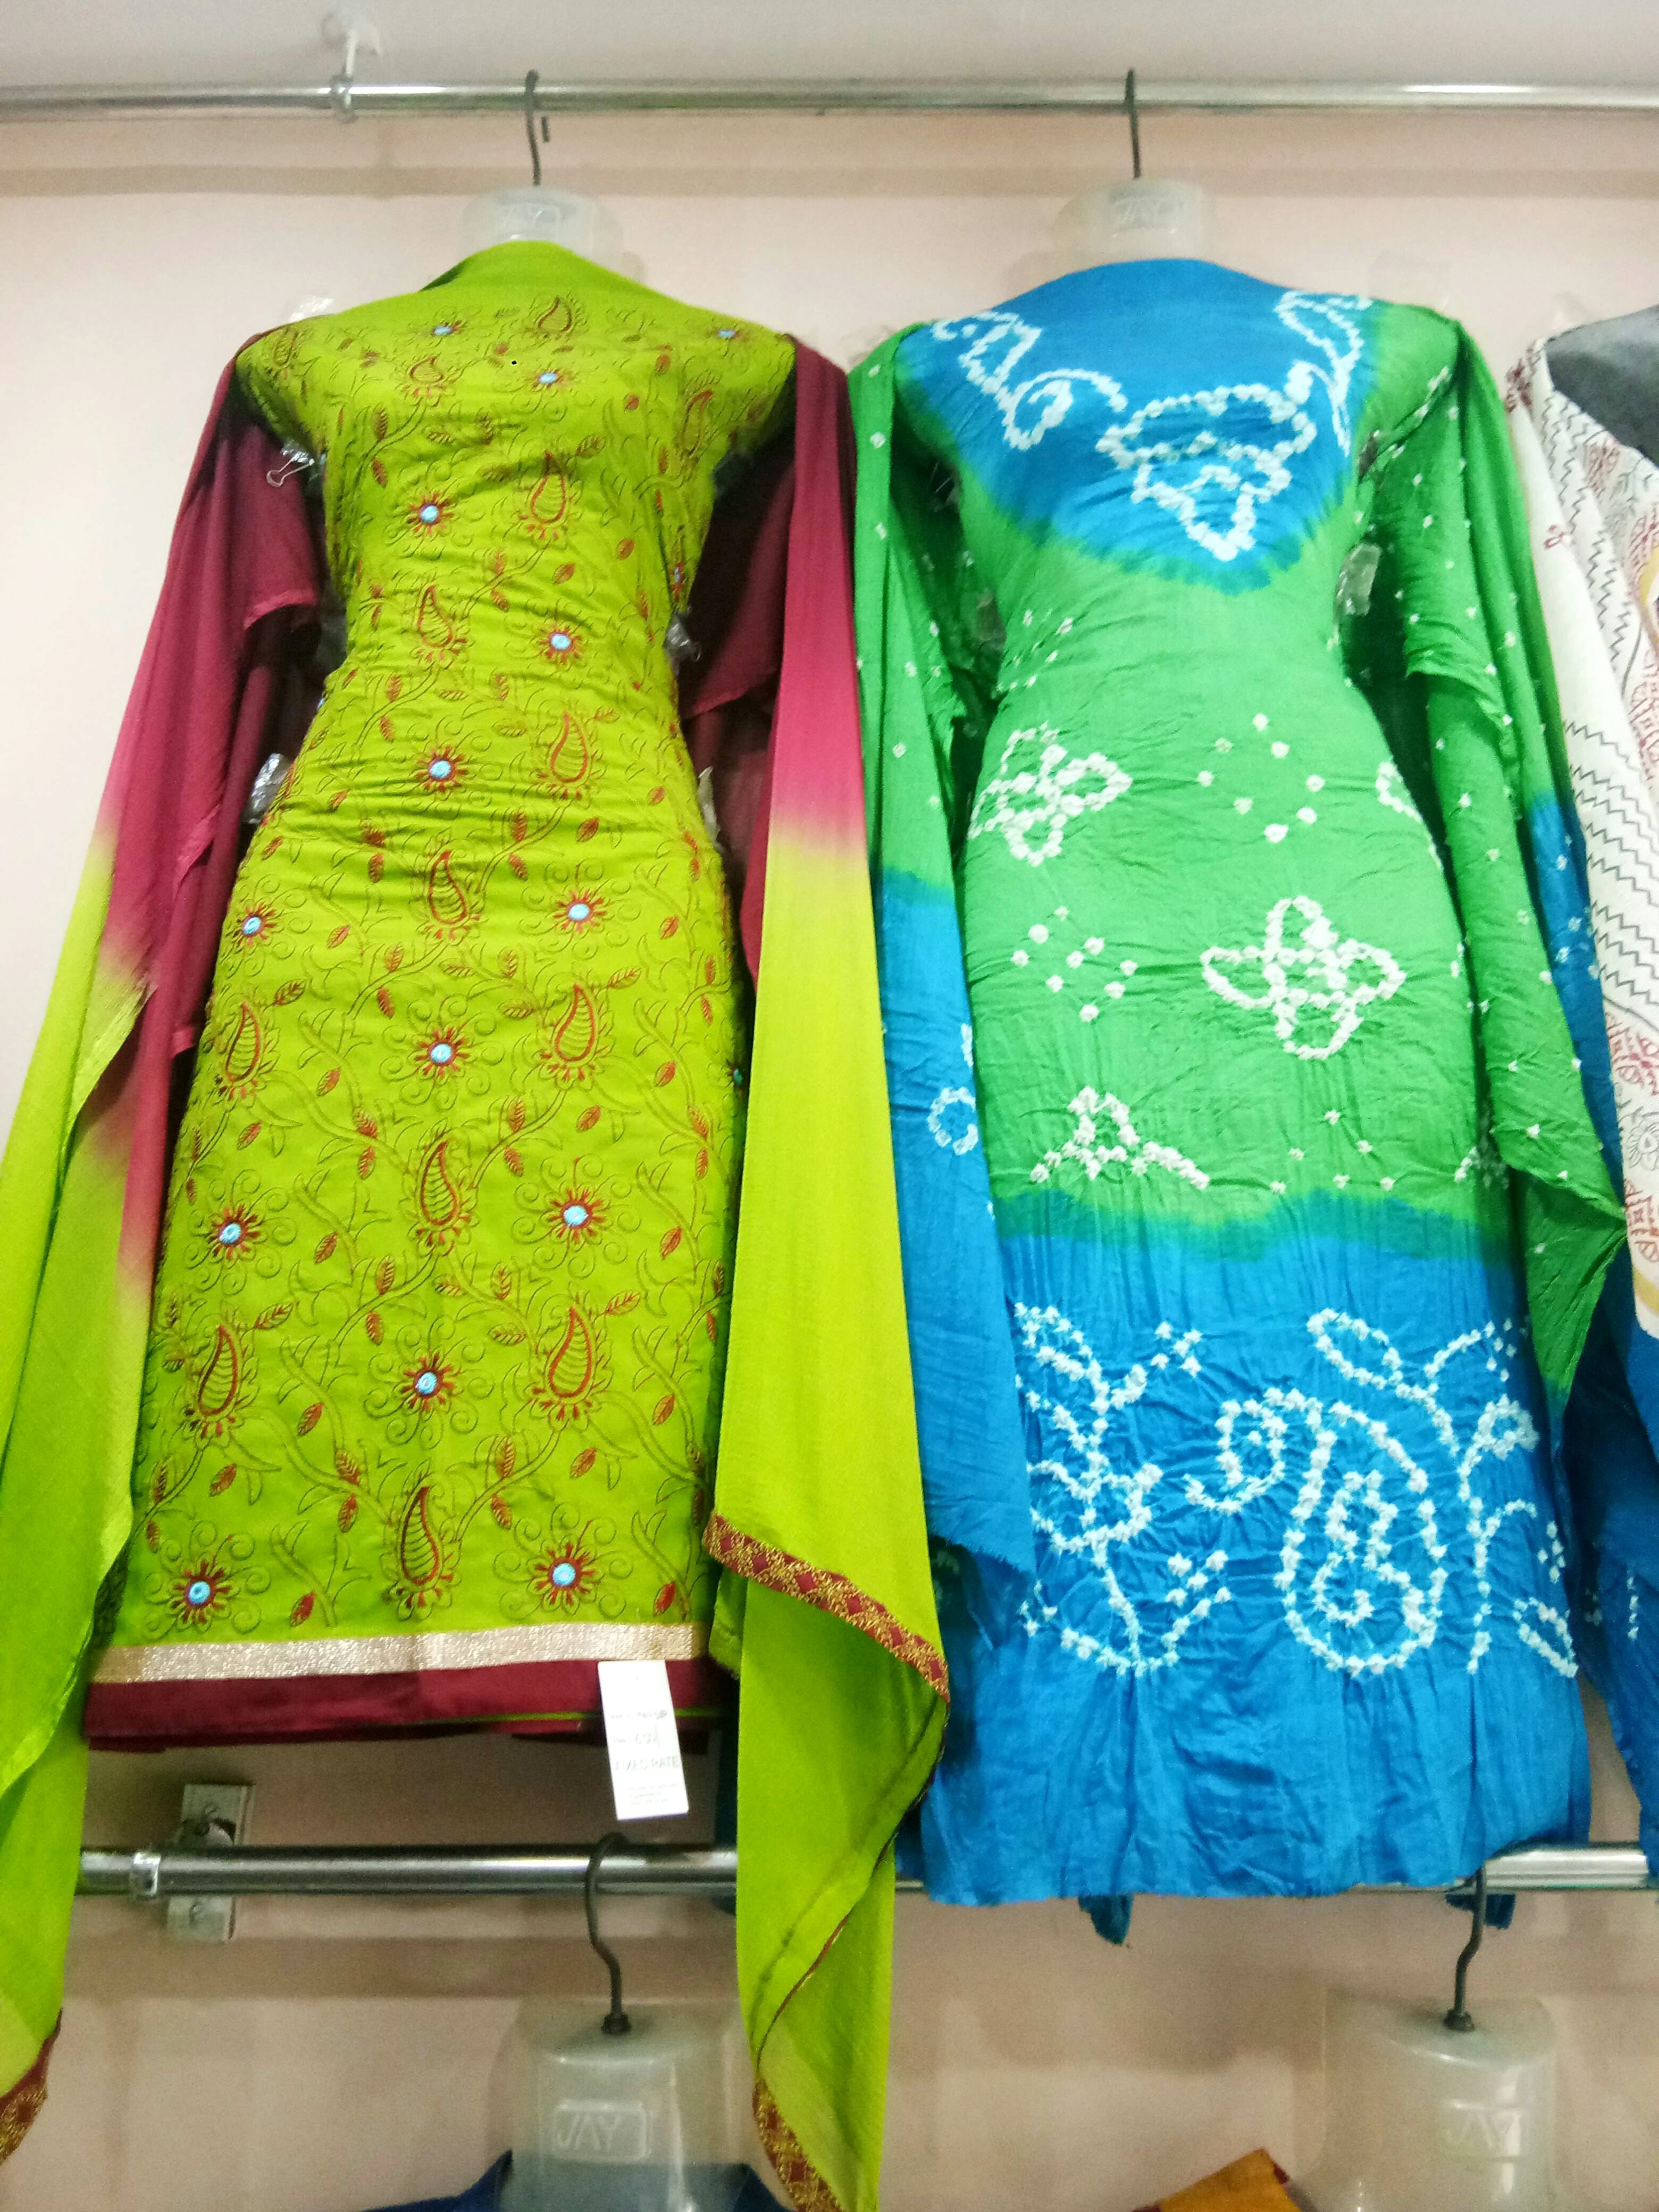 Clothing,Green,Yellow,Outerwear,Textile,Fashion design,Formal wear,Embroidery,Boutique,Dress